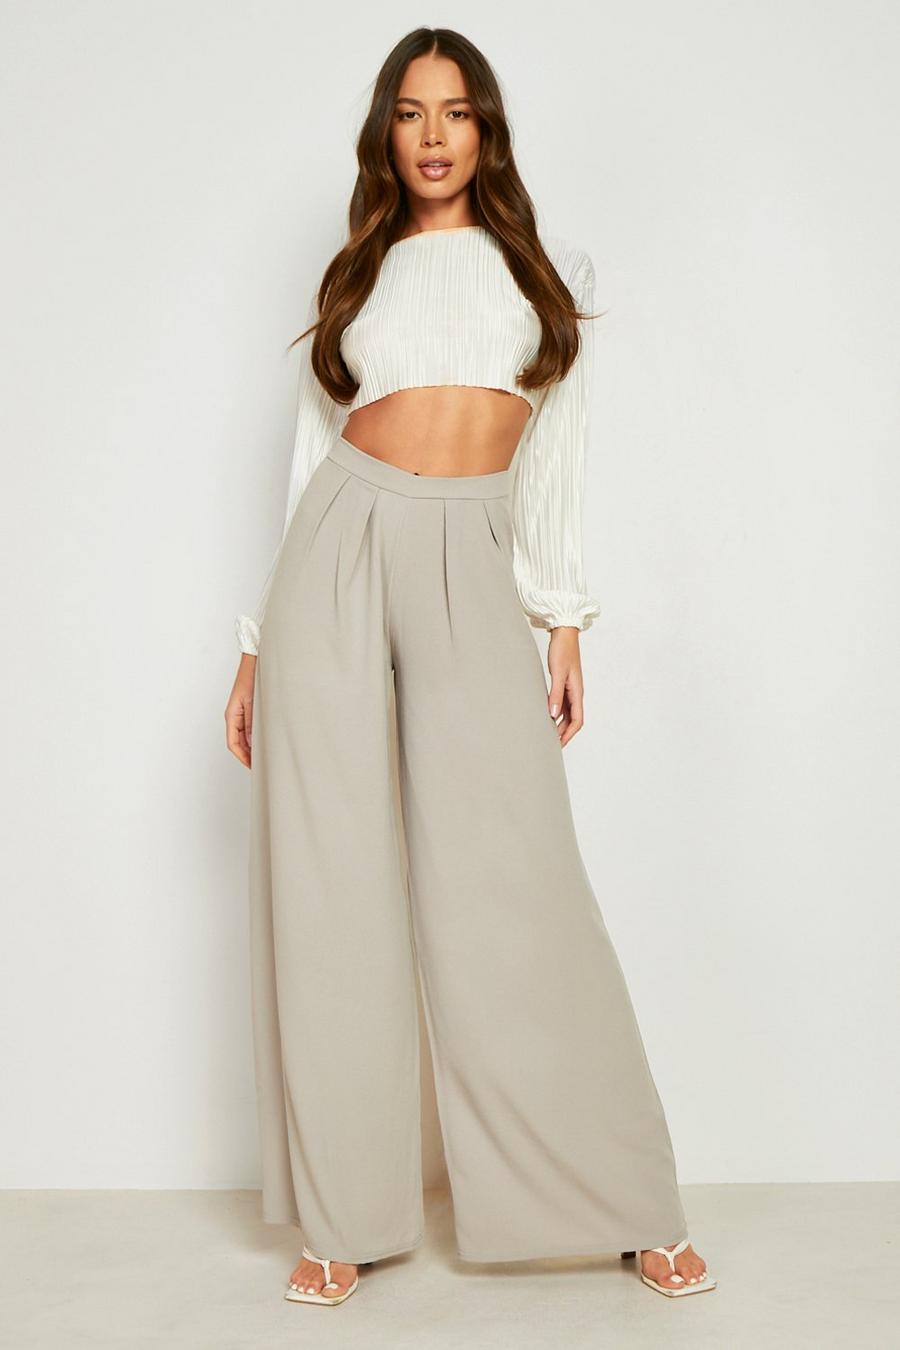 High Waisted Flared Trousers in Black Crepe Ready To Ship – The Dolls House  Fashion